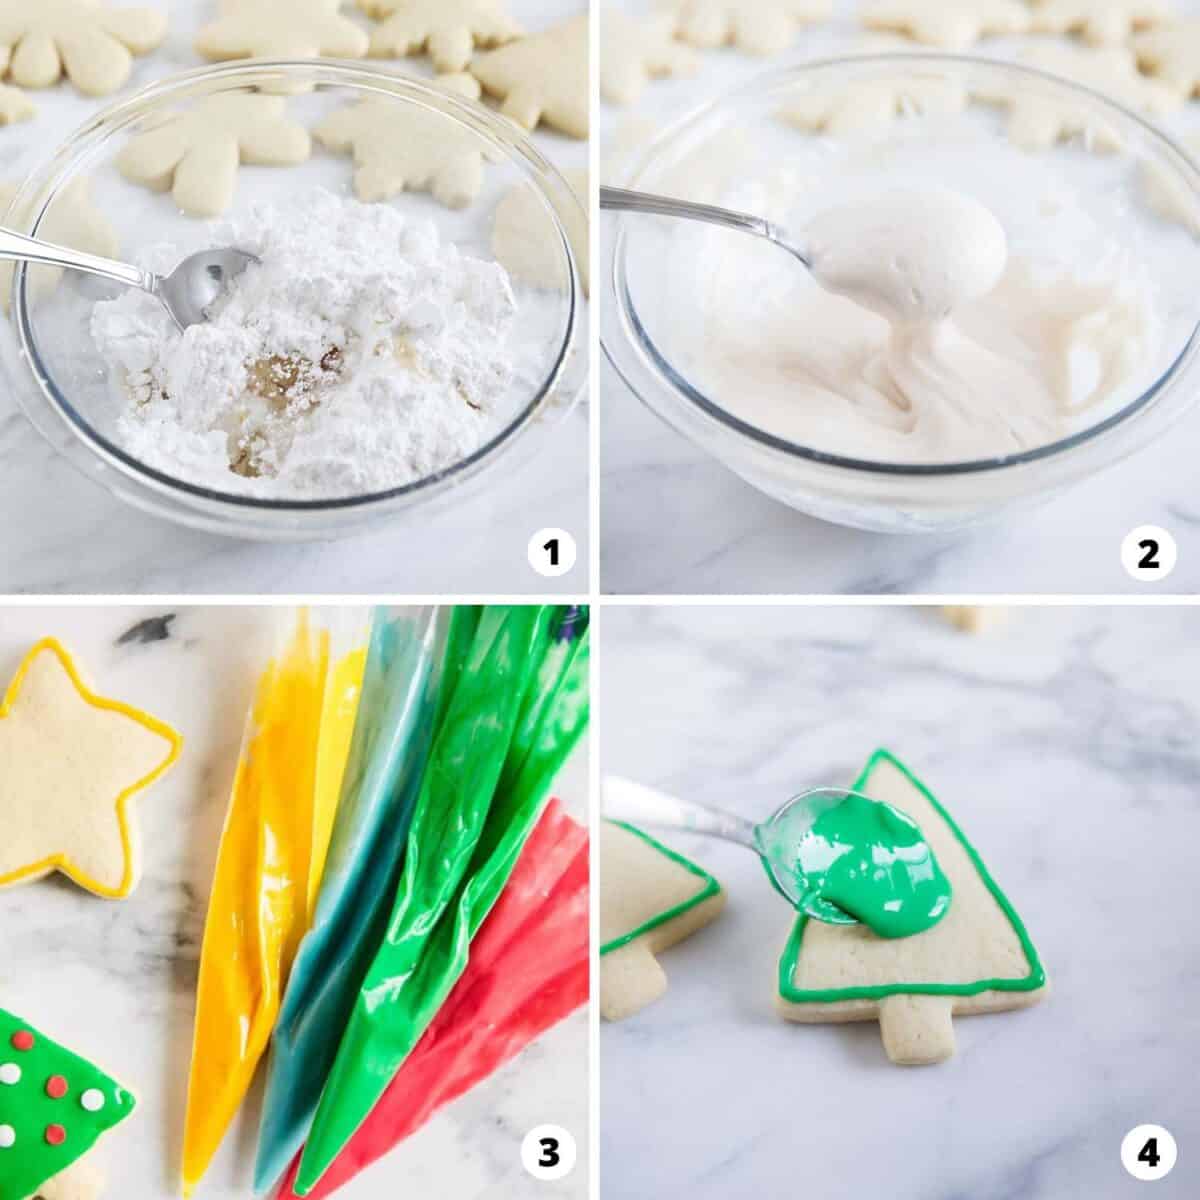 Showing how to make sugar cookie icing in a 4 step collage. 